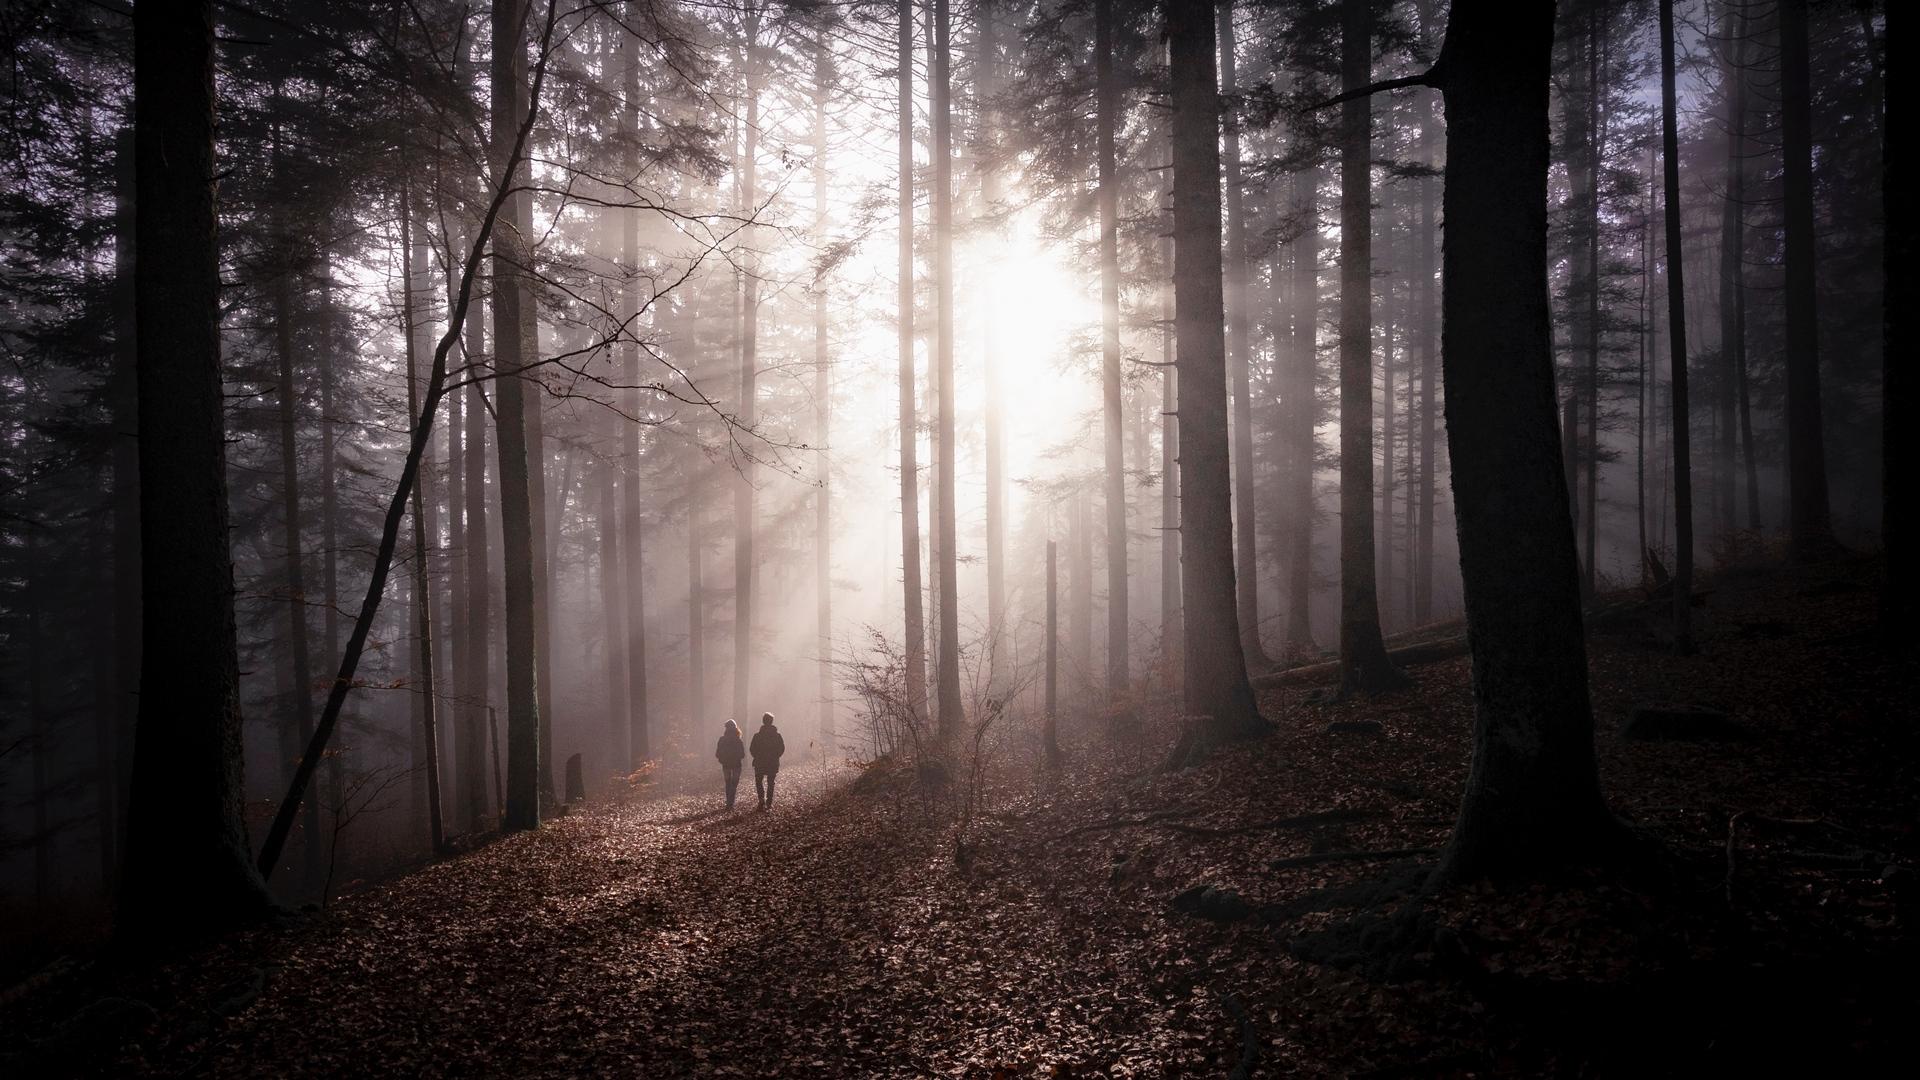 Download wallpaper 1920x1080 forest, fog, silhouettes, walk